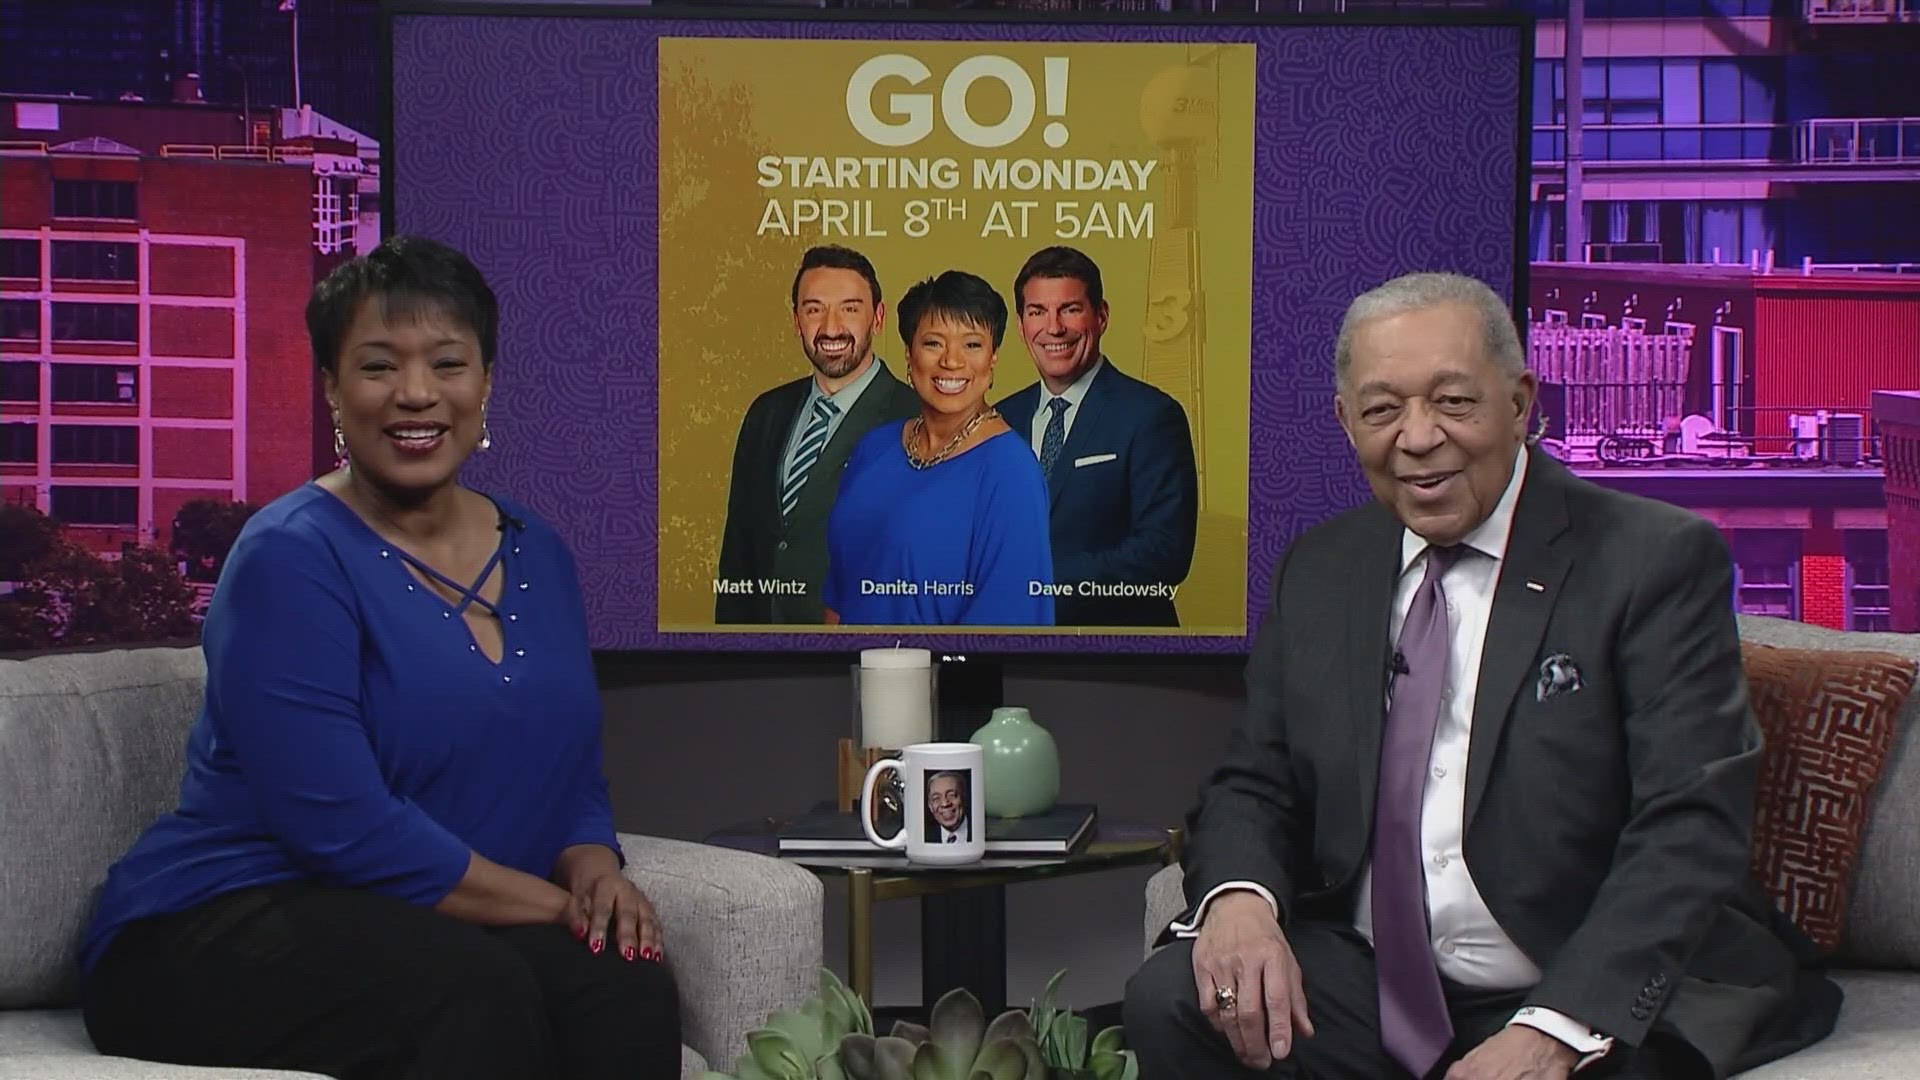 Leon sits down with Danita Harris, who is joining the GO! Team weekdays at 5AM, and they talk about her joining 3News and her organization SHINE.